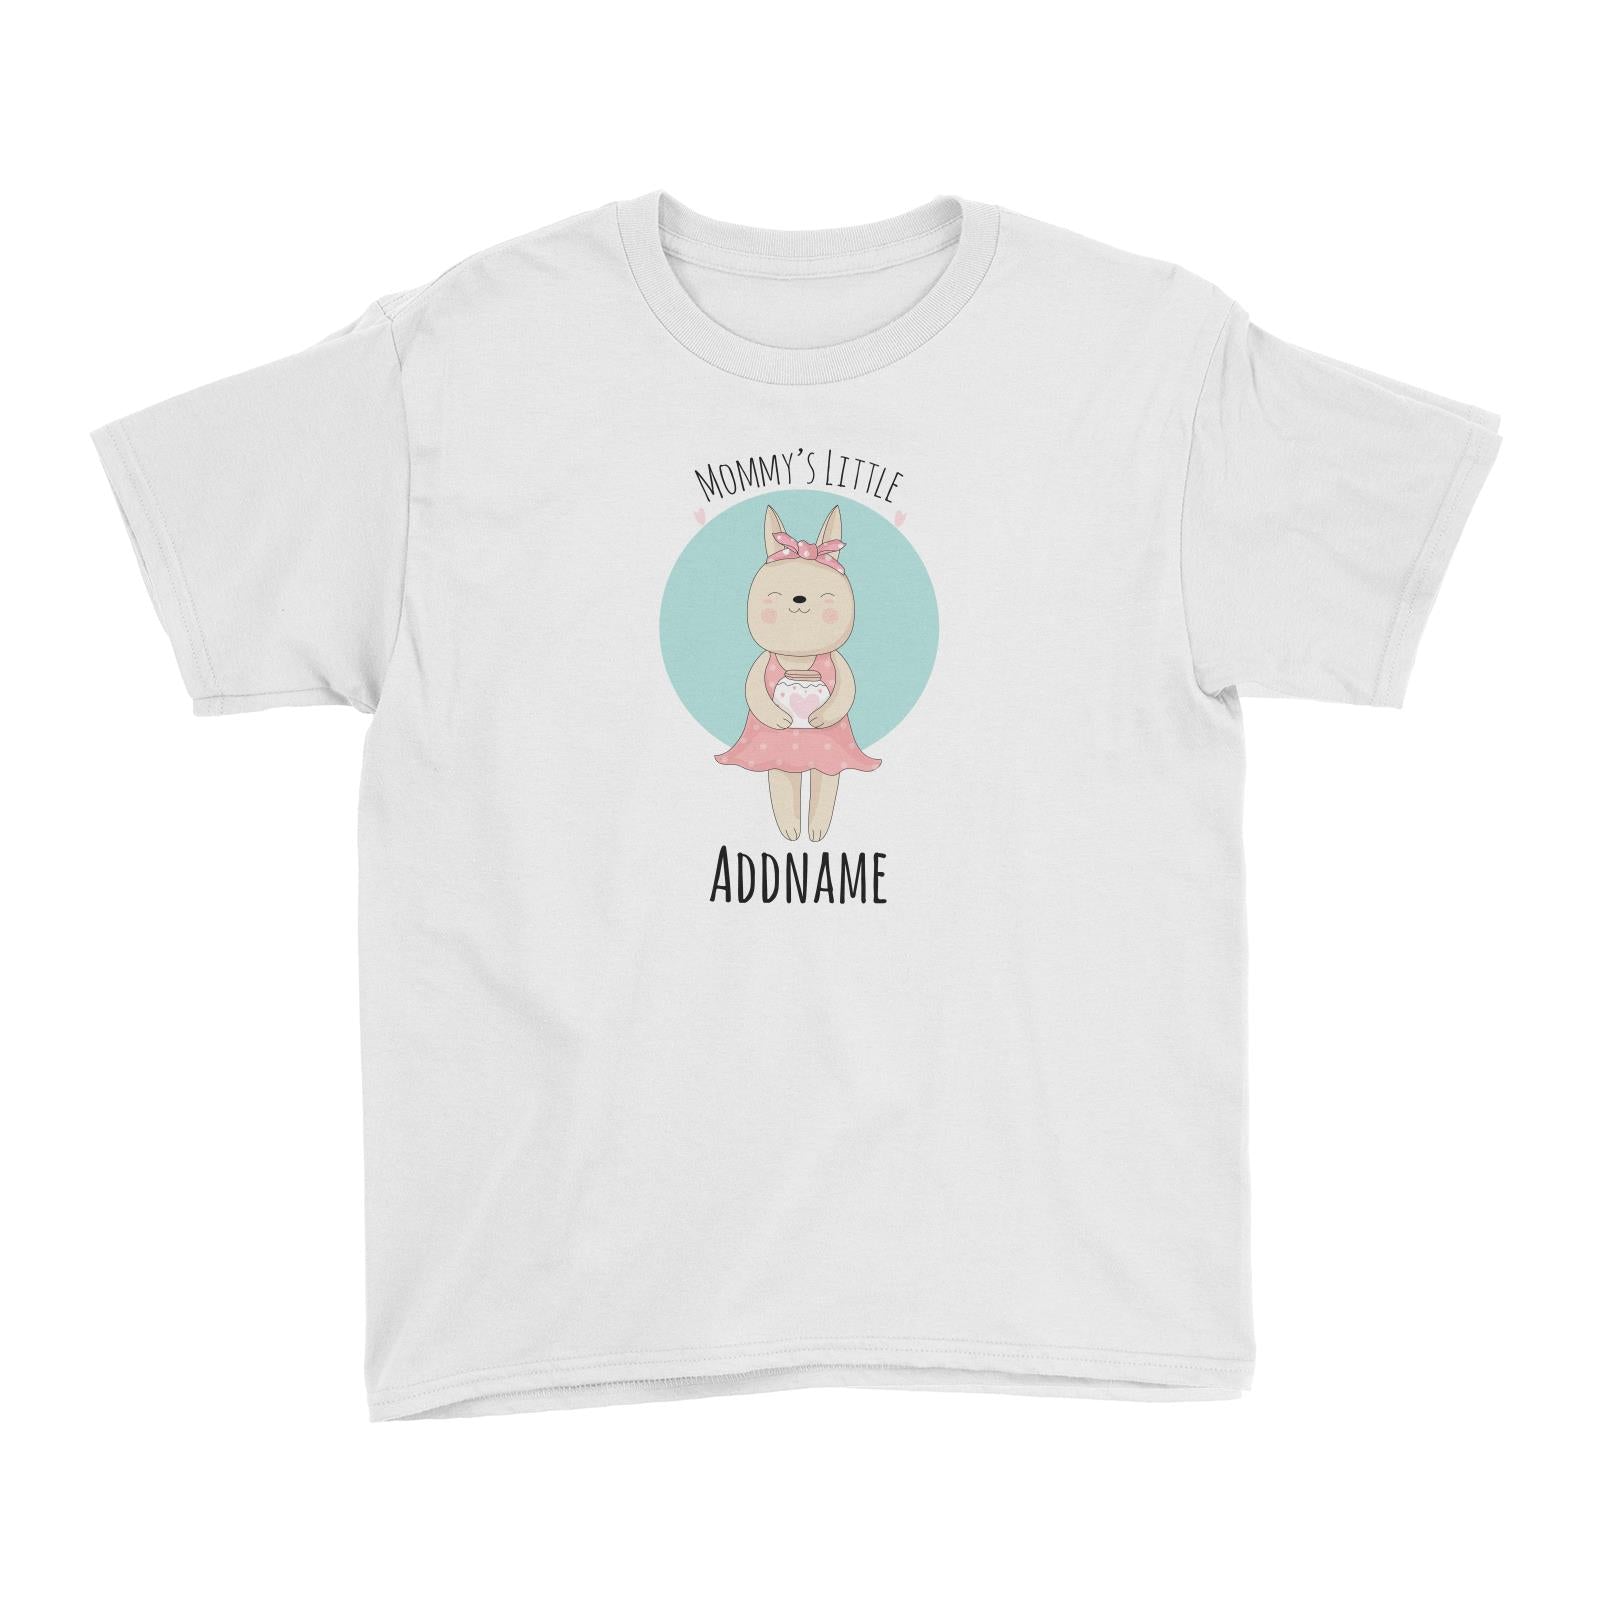 Sweet Animals Sketches Mommy's Little Bunny Addname Kid's T-Shirt